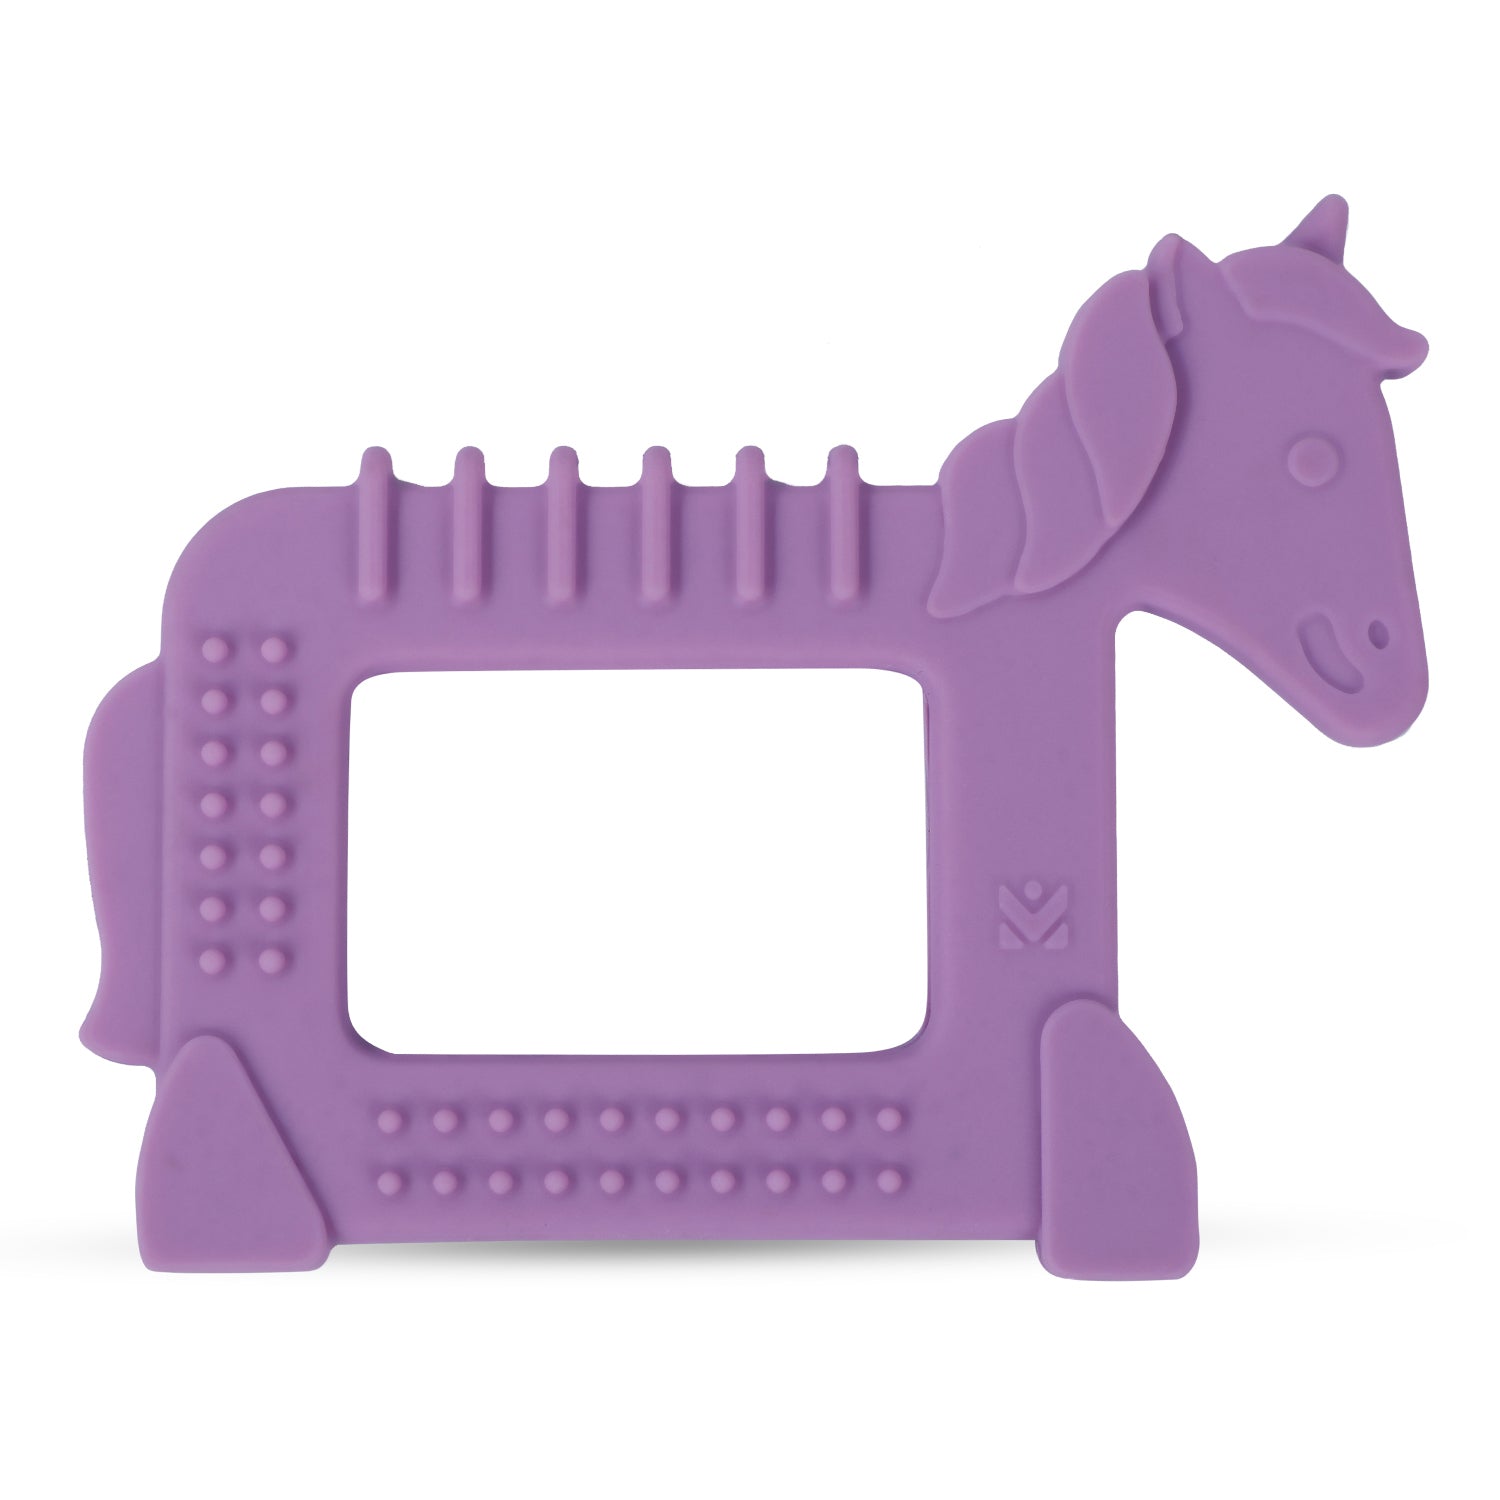 Baby Moo Unicorn Soothing Silicon Teether BPA And Toxin Free - Purple - Baby Moo